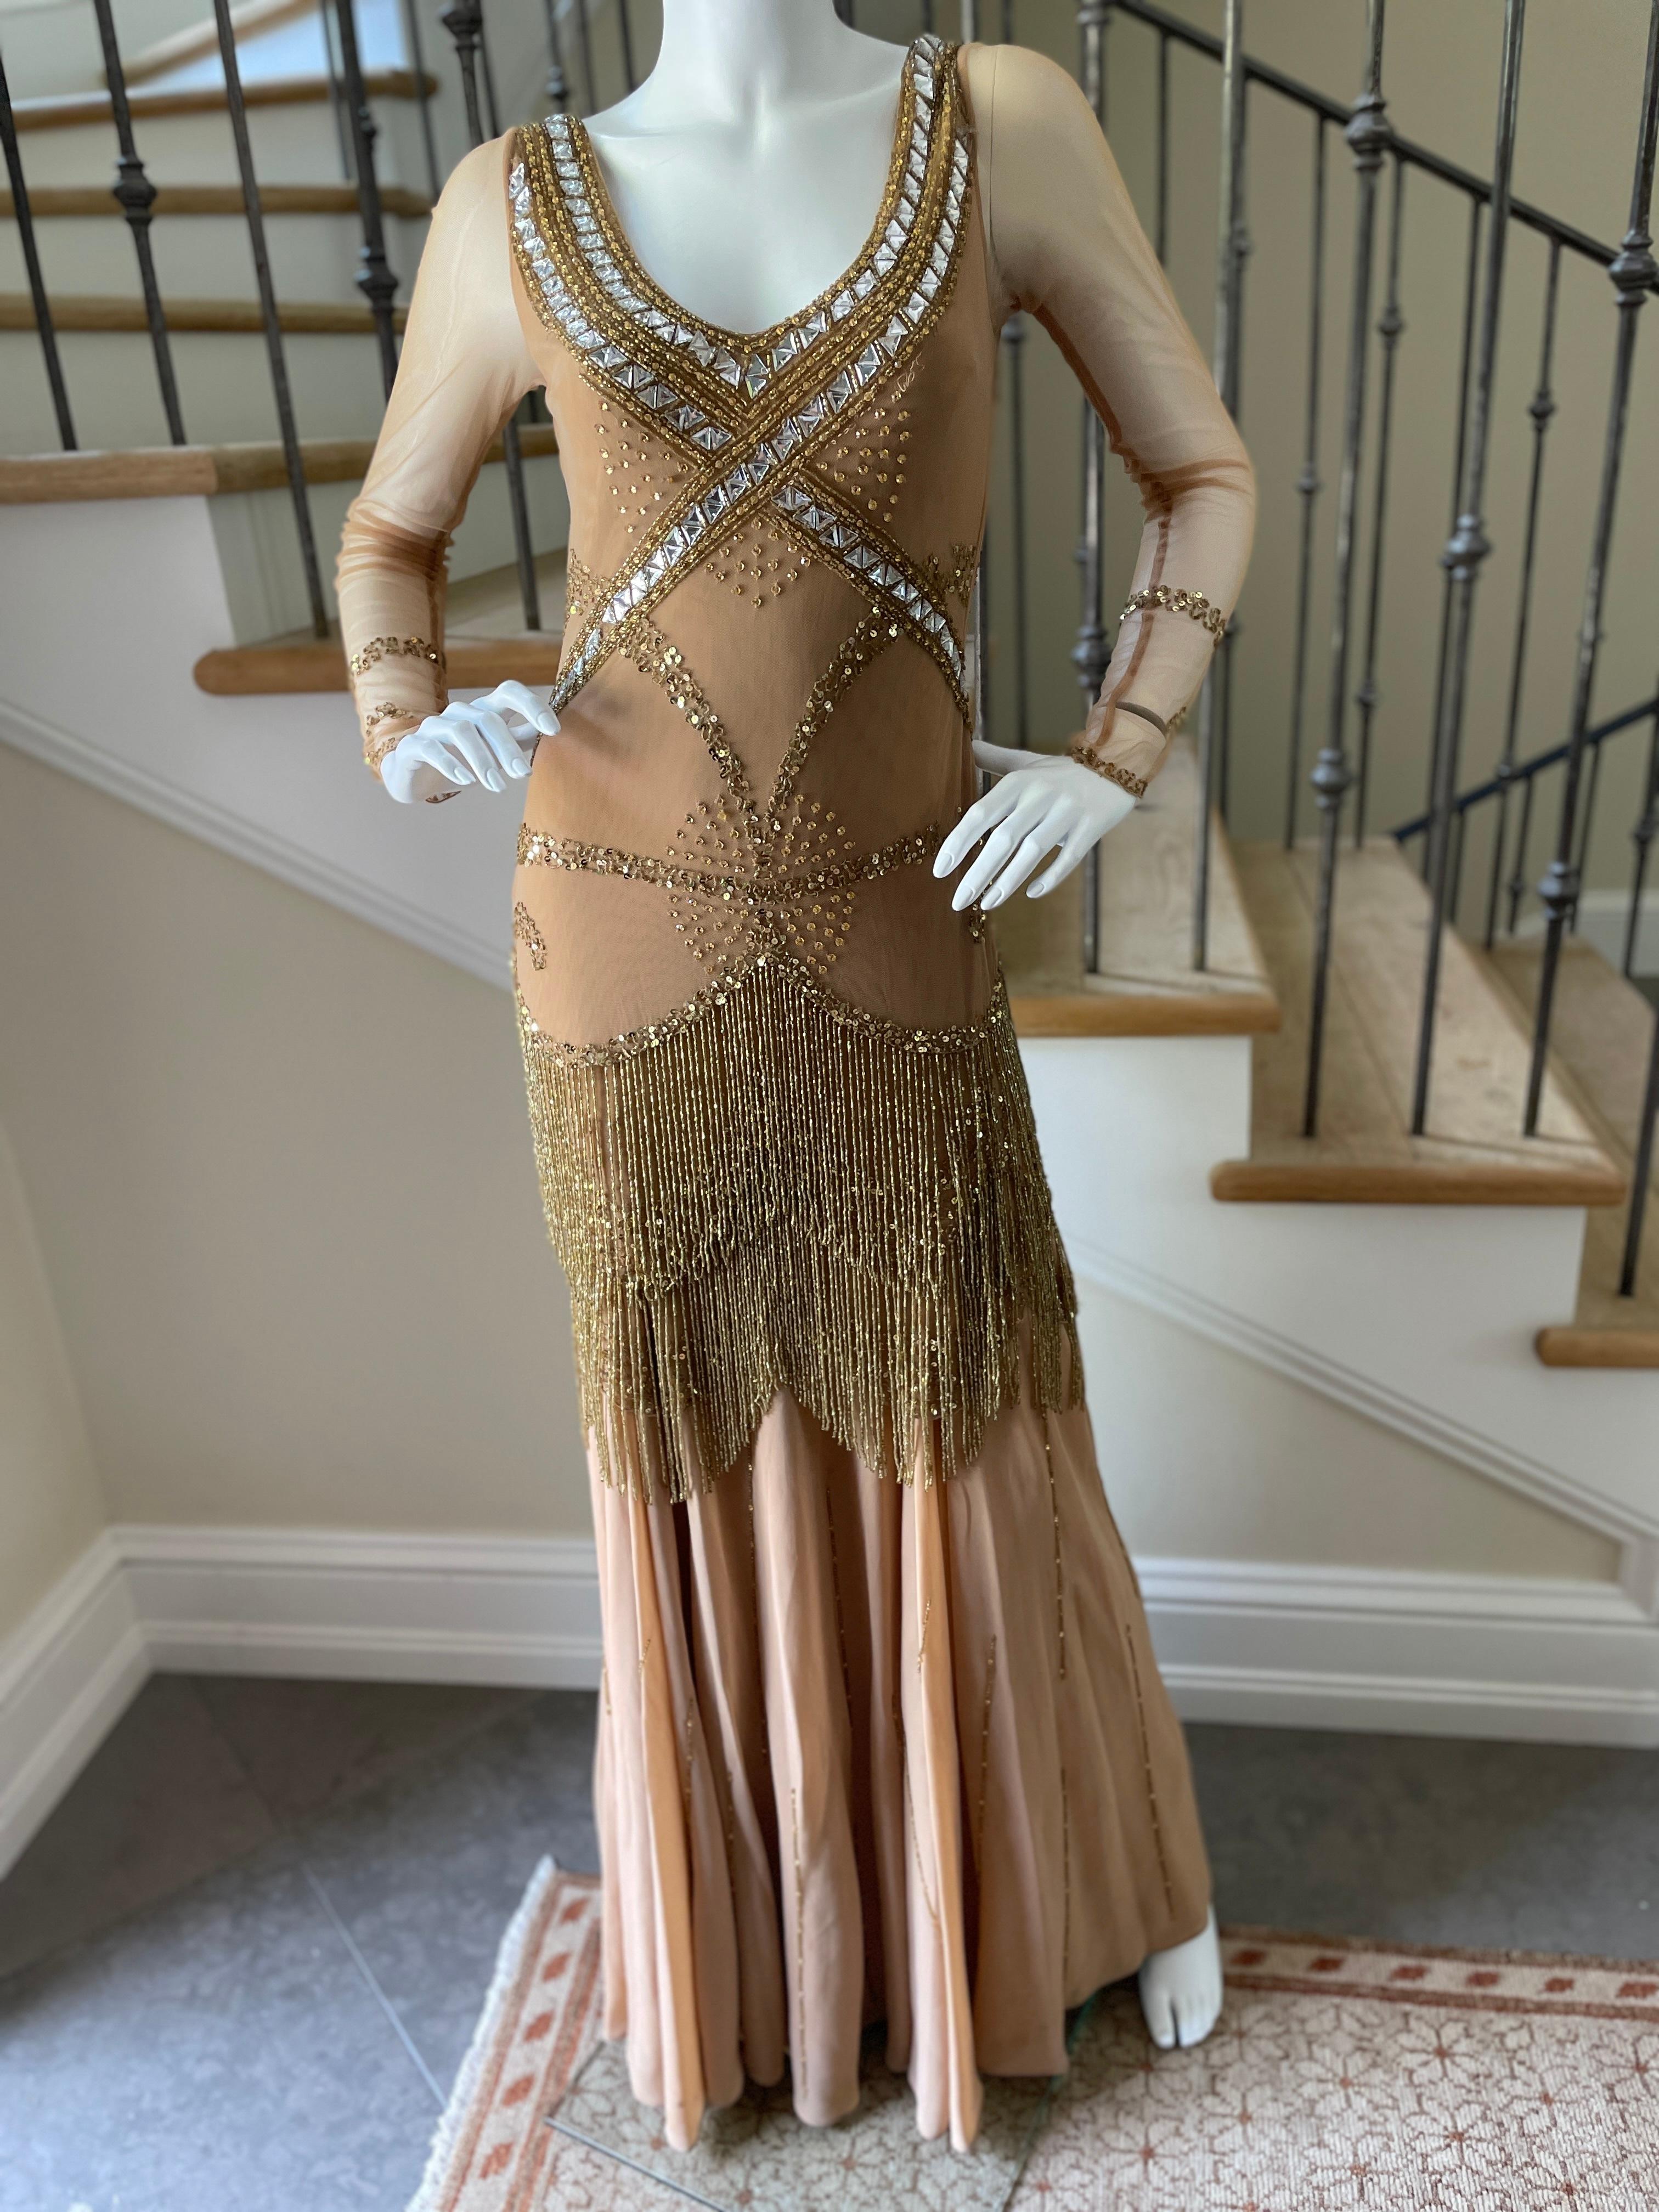 Class Cavalli Extravagantly Jeweled Vintage Evening Dress with Beaded Fringe.
This is remarkable, please use the zoom feature to see the details.
This is rather heavy as the bead fringe is glass beads, and the crystals are also glass, causing it to